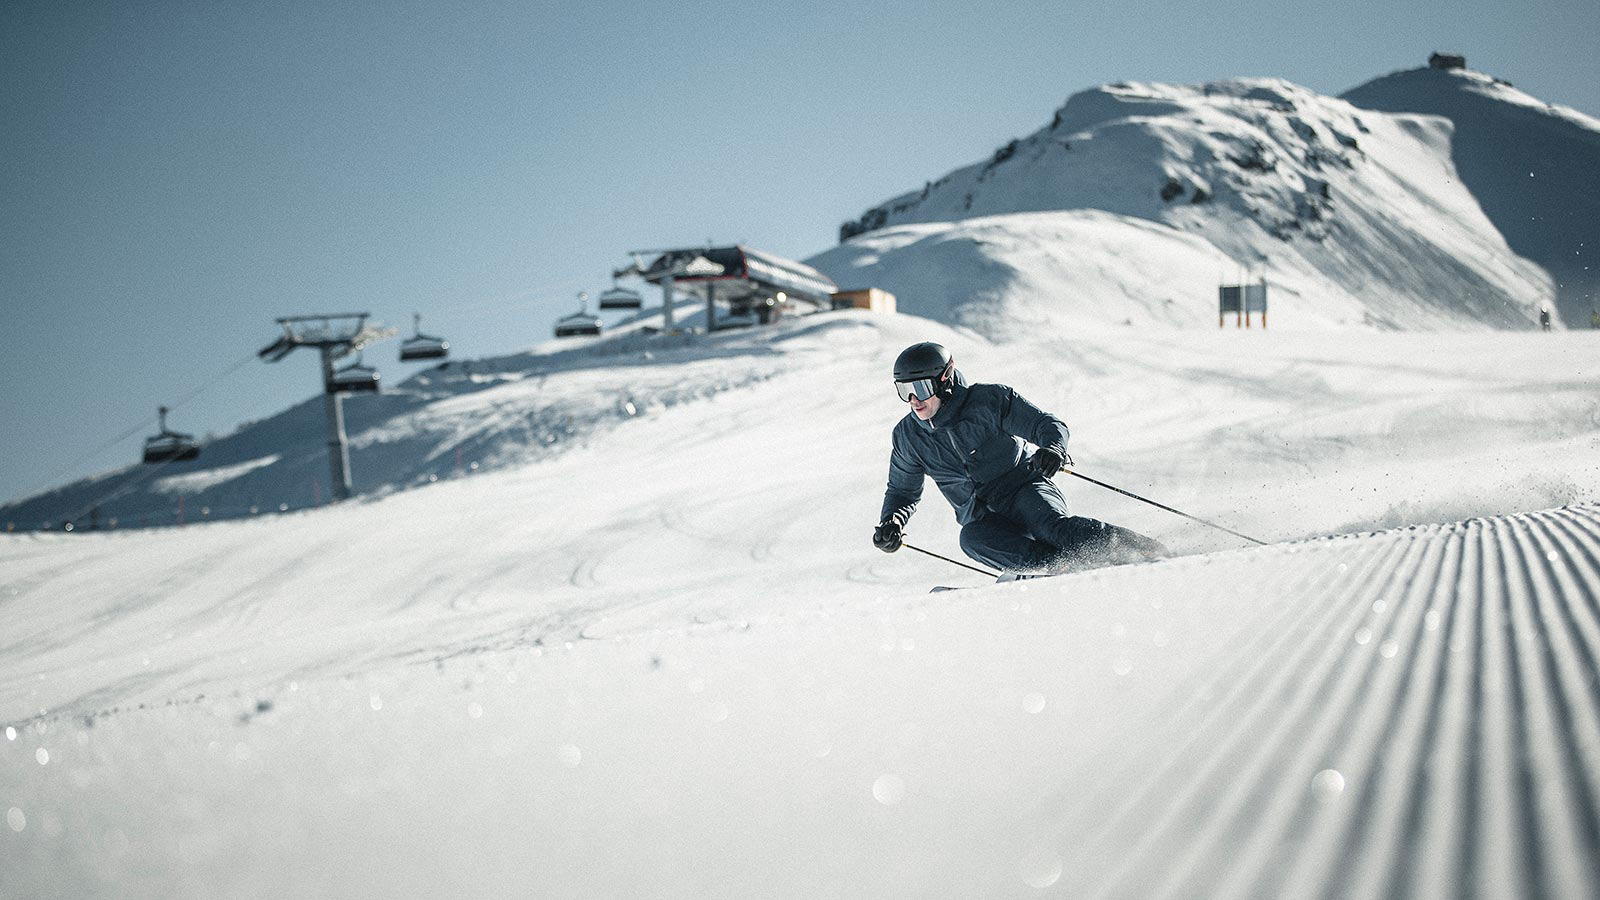 A skier is intent on slaloming down a snowy slope.